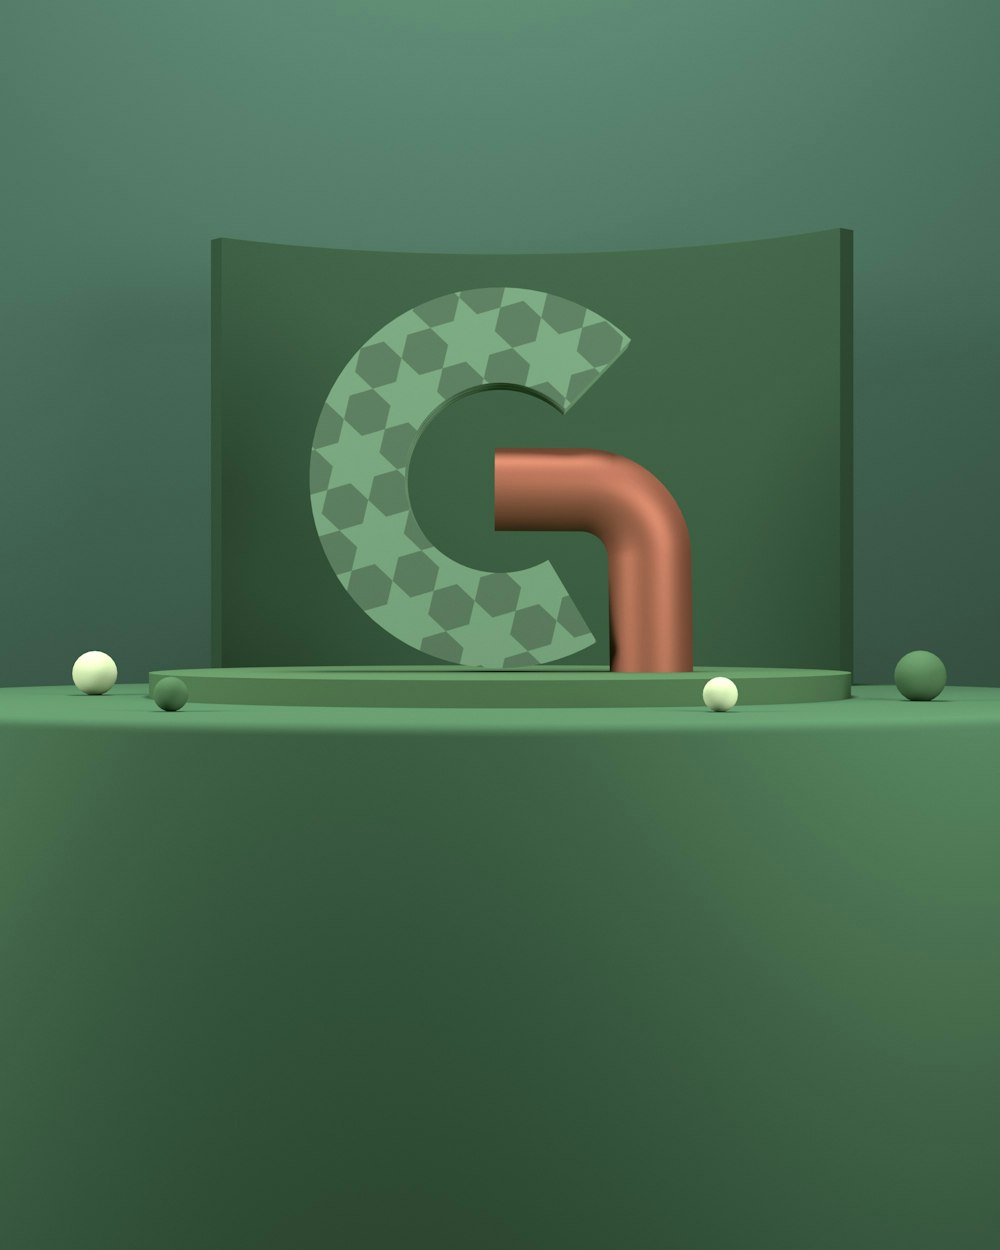 a green object with a red object in the middle of it